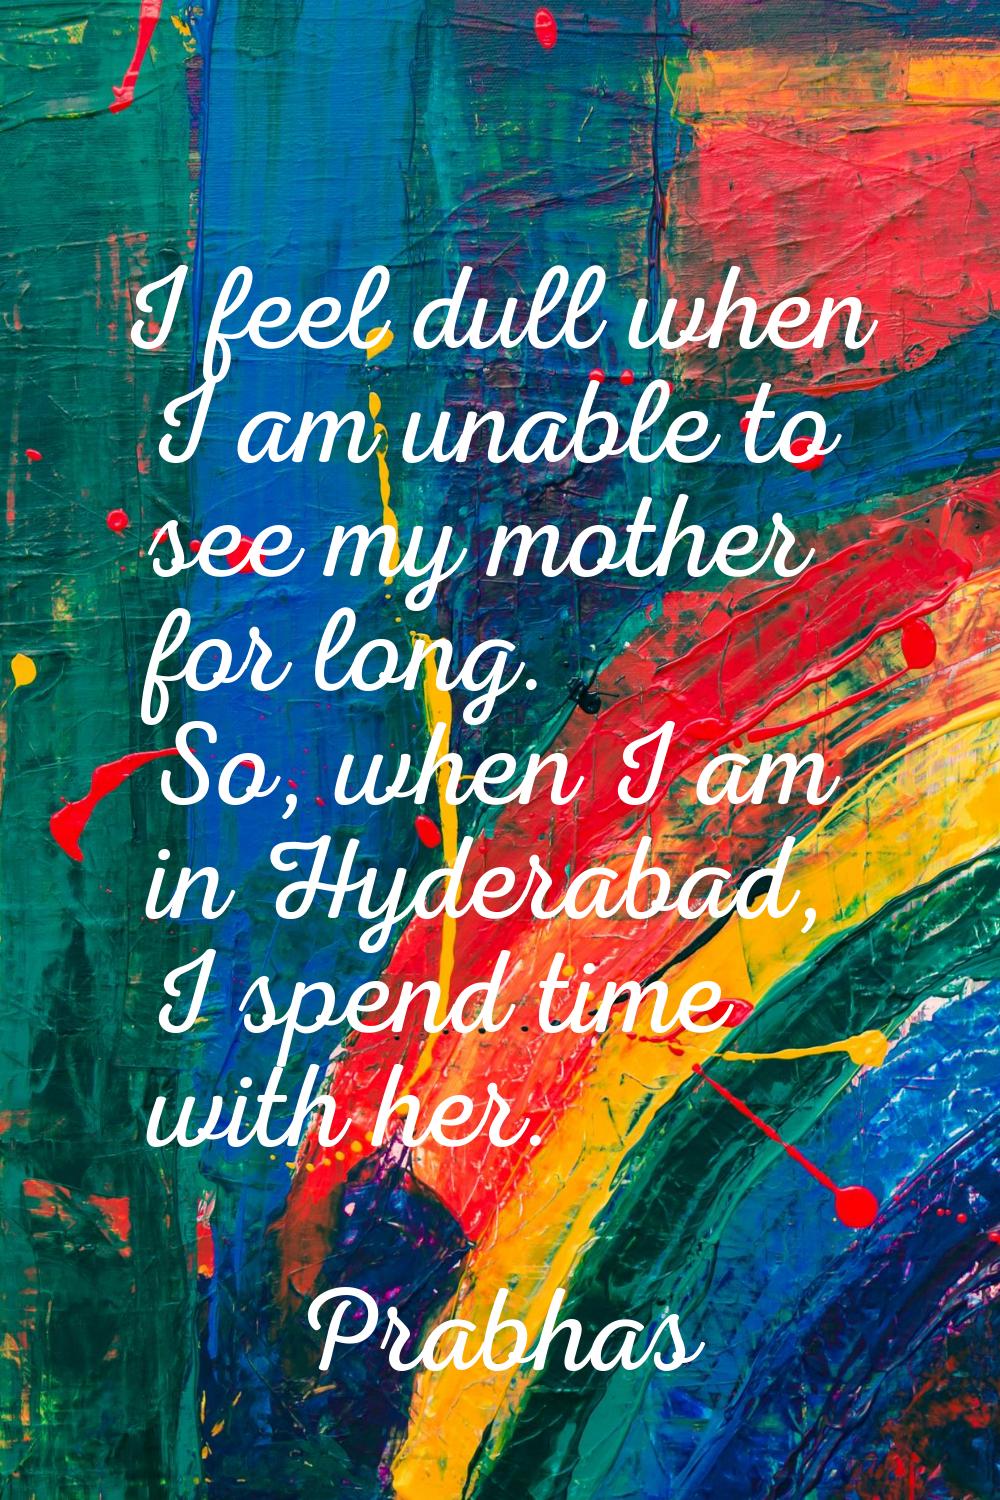 I feel dull when I am unable to see my mother for long. So, when I am in Hyderabad, I spend time wi